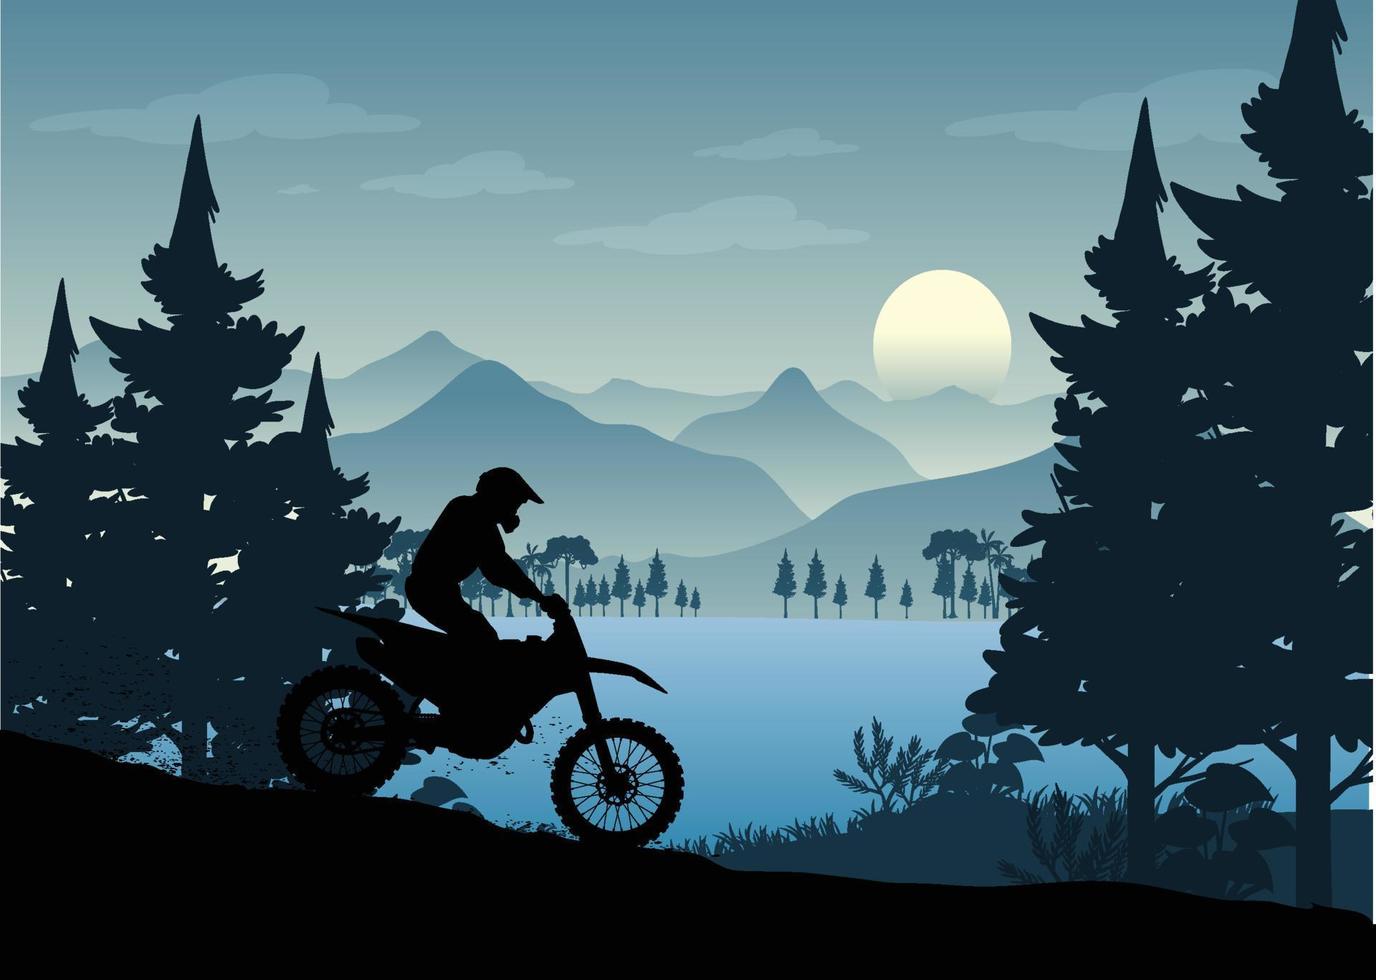 Motorbike Riders Motorcycle Silhouettes In Wild Forest Mountain Nature Landscape Background vector